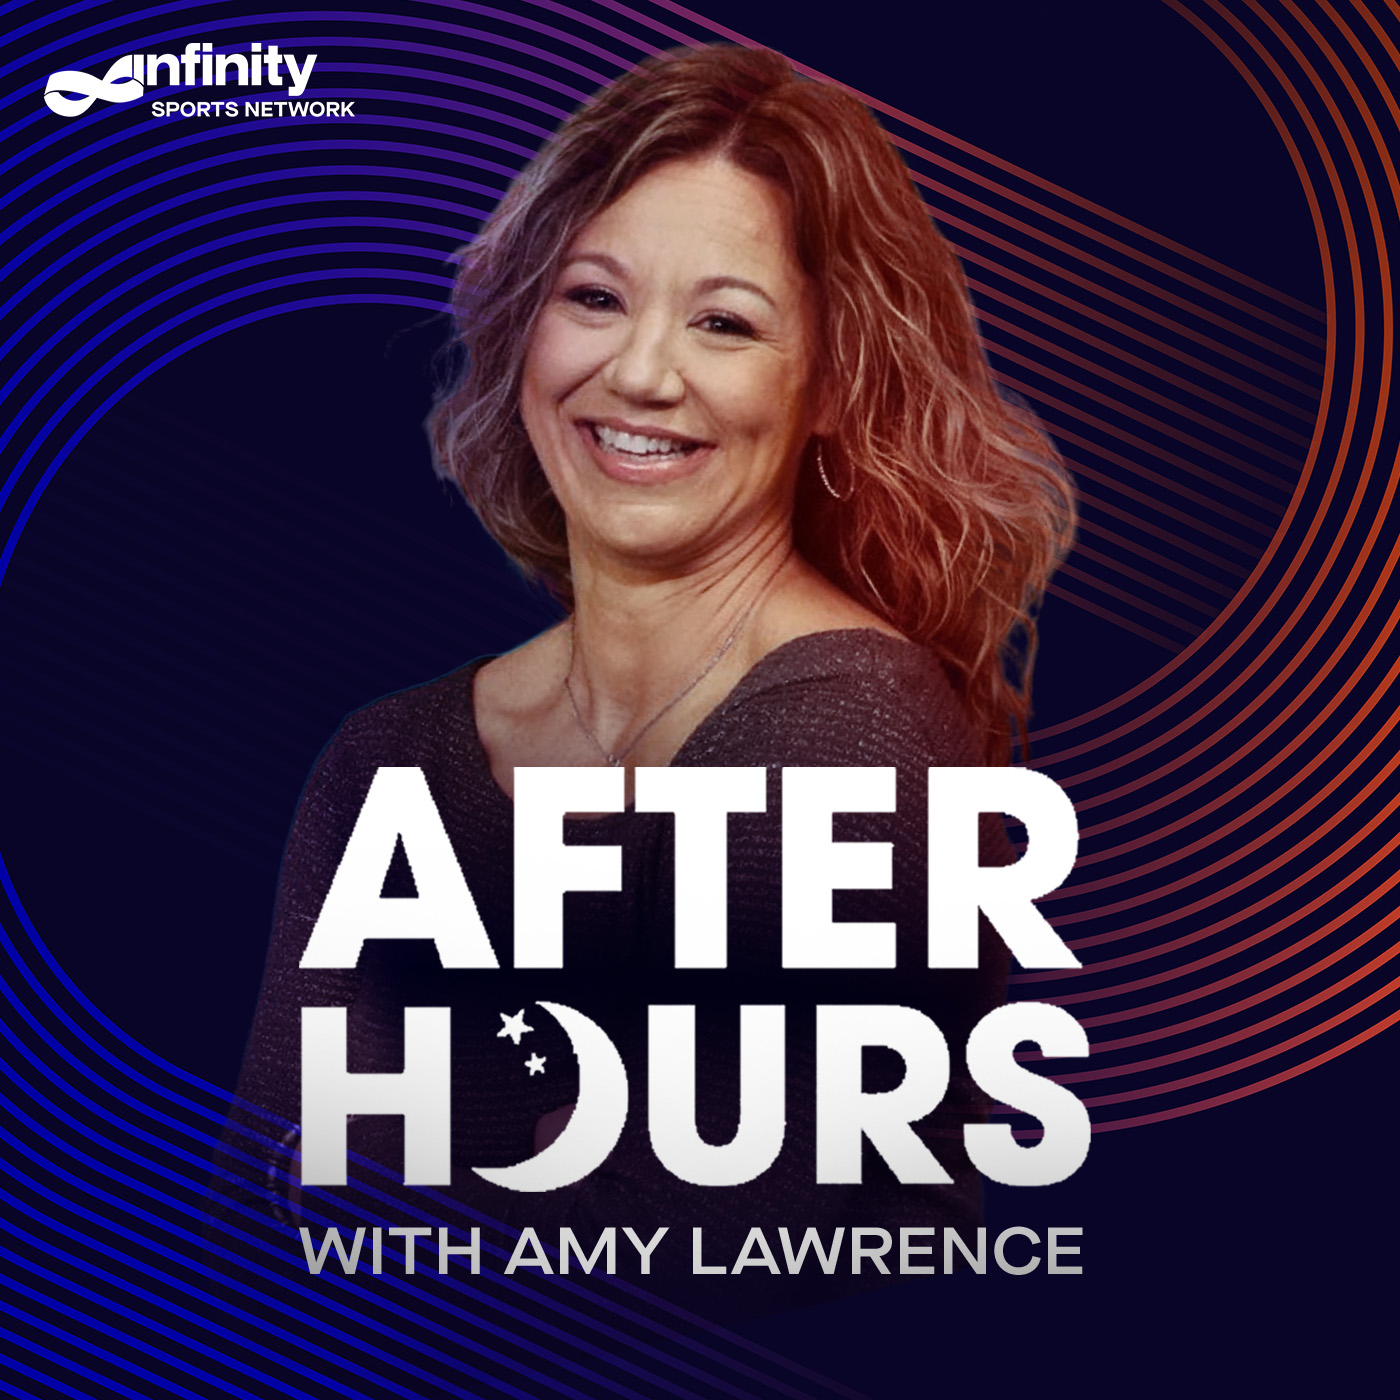 6/2/21 After Hours with Amy Lawrence PODCAST: Hour 3